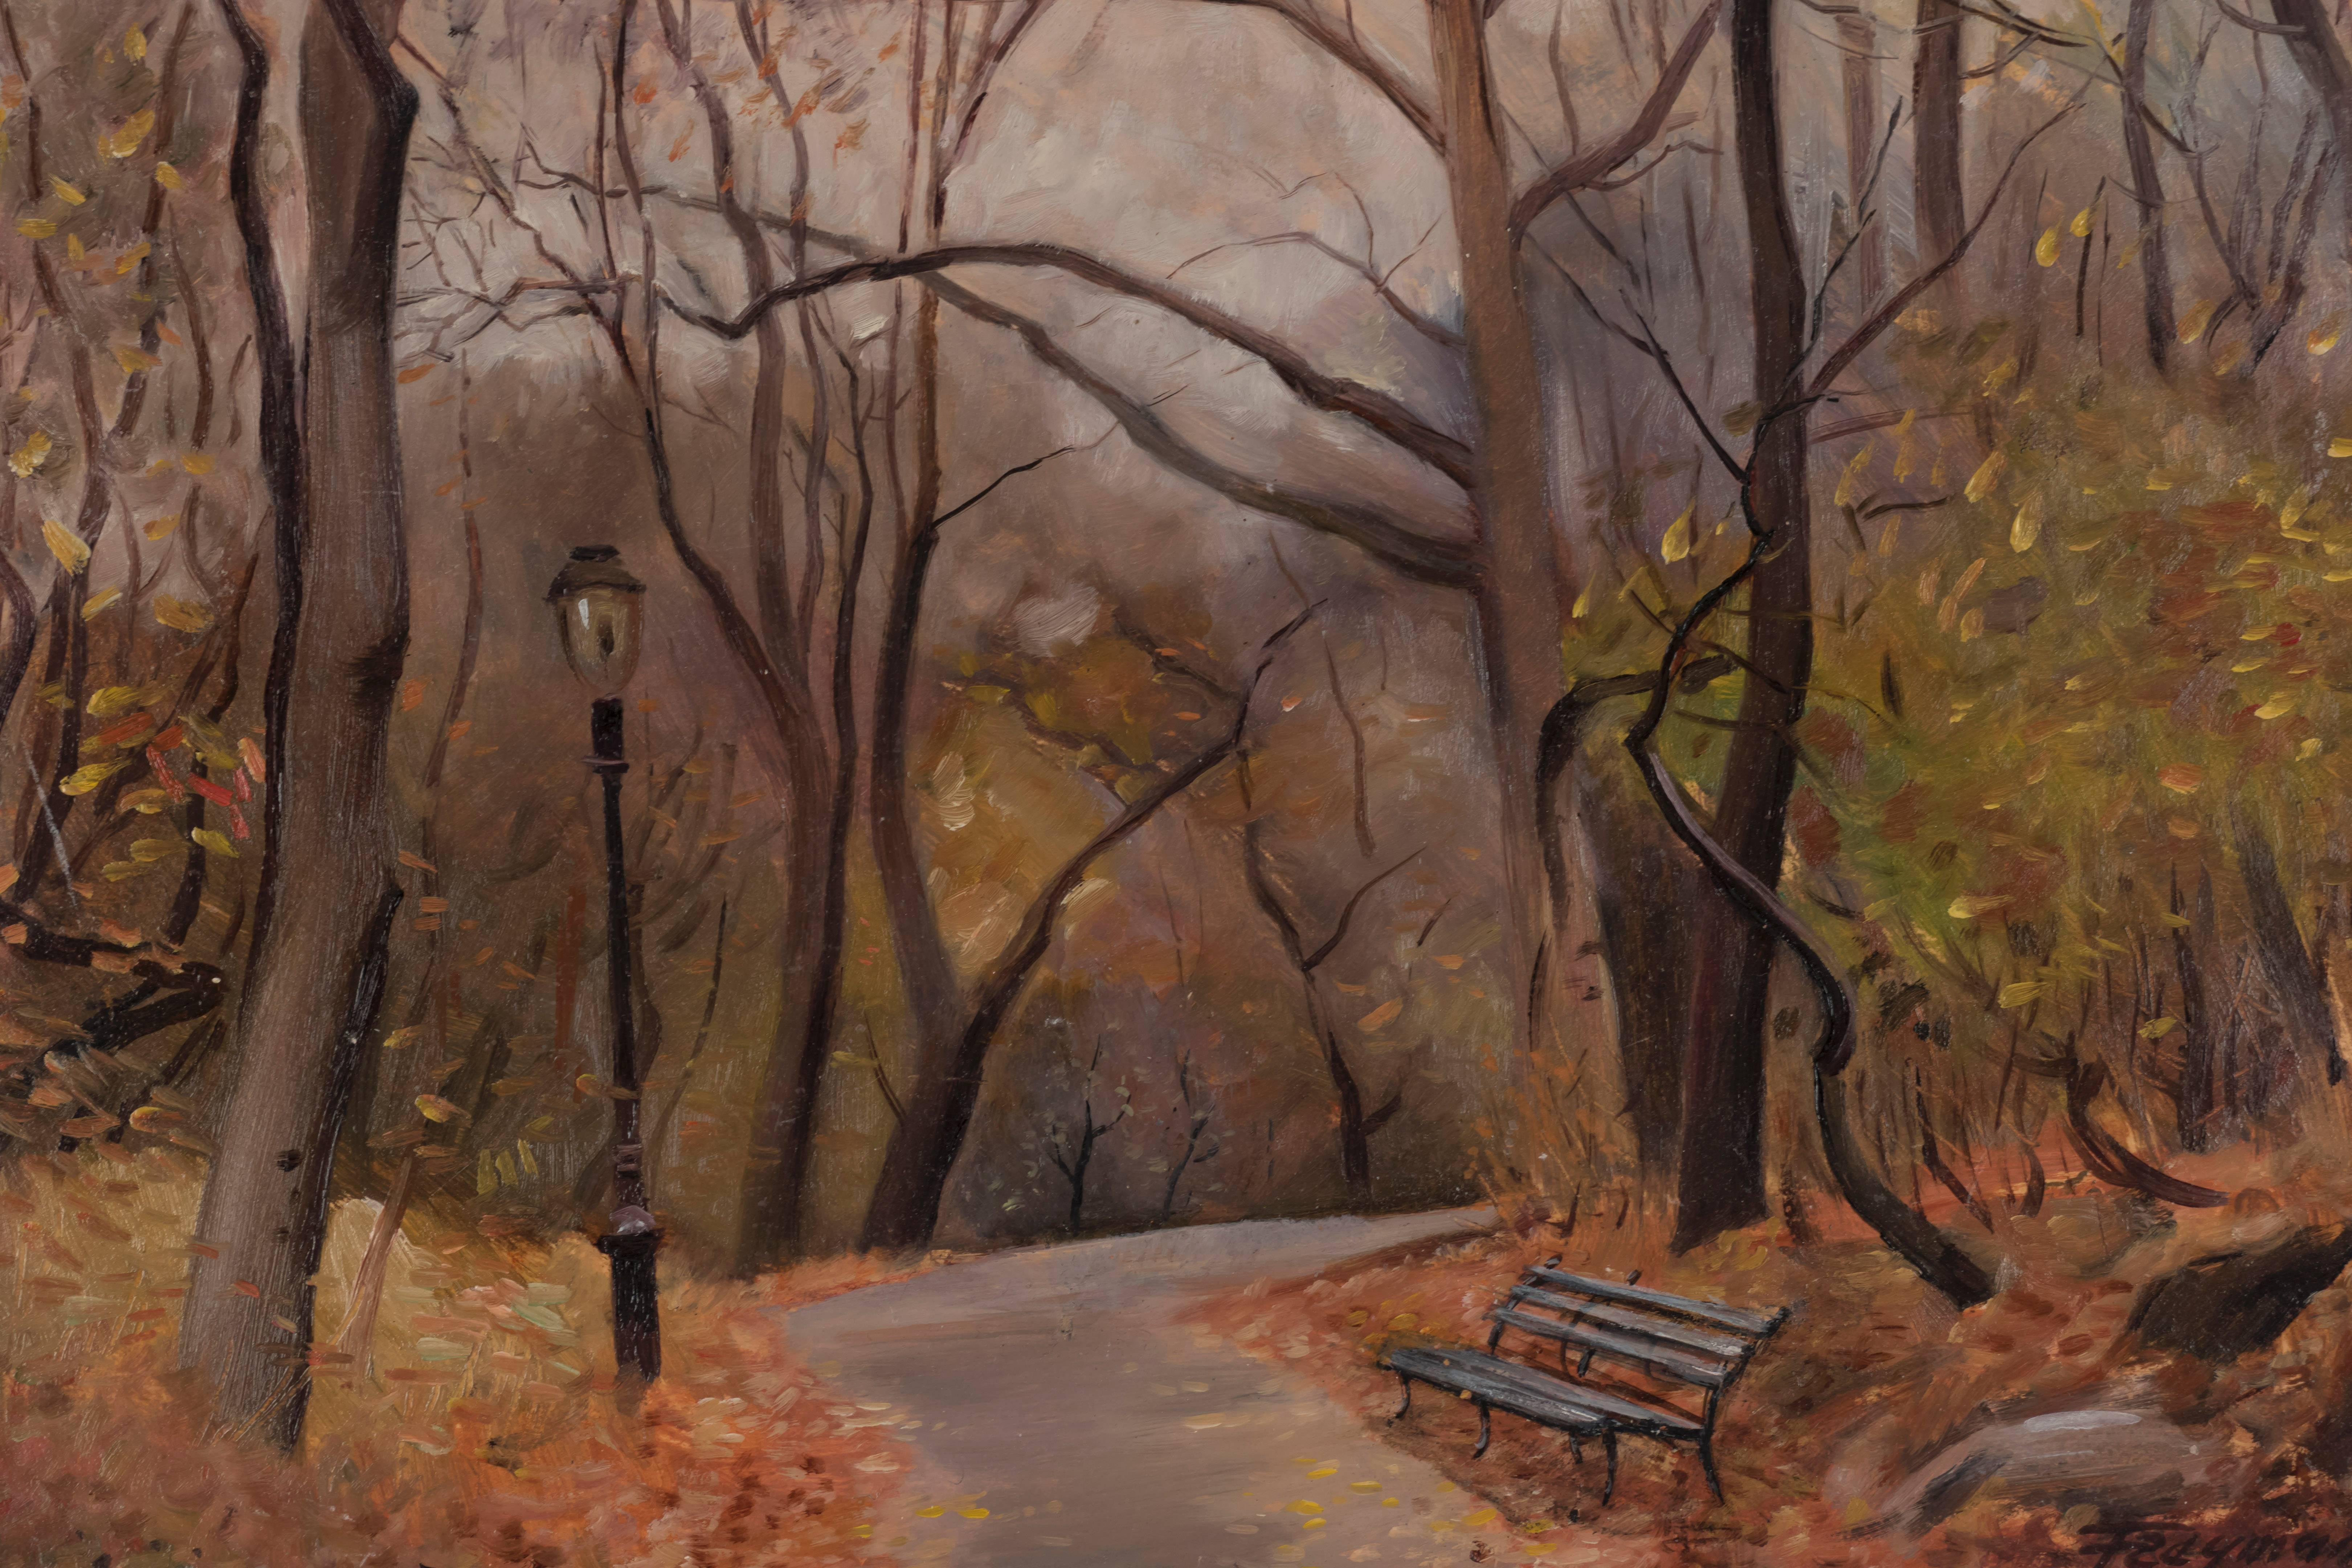 Fall in Central Park, New York City - Painting by Erik Freyman